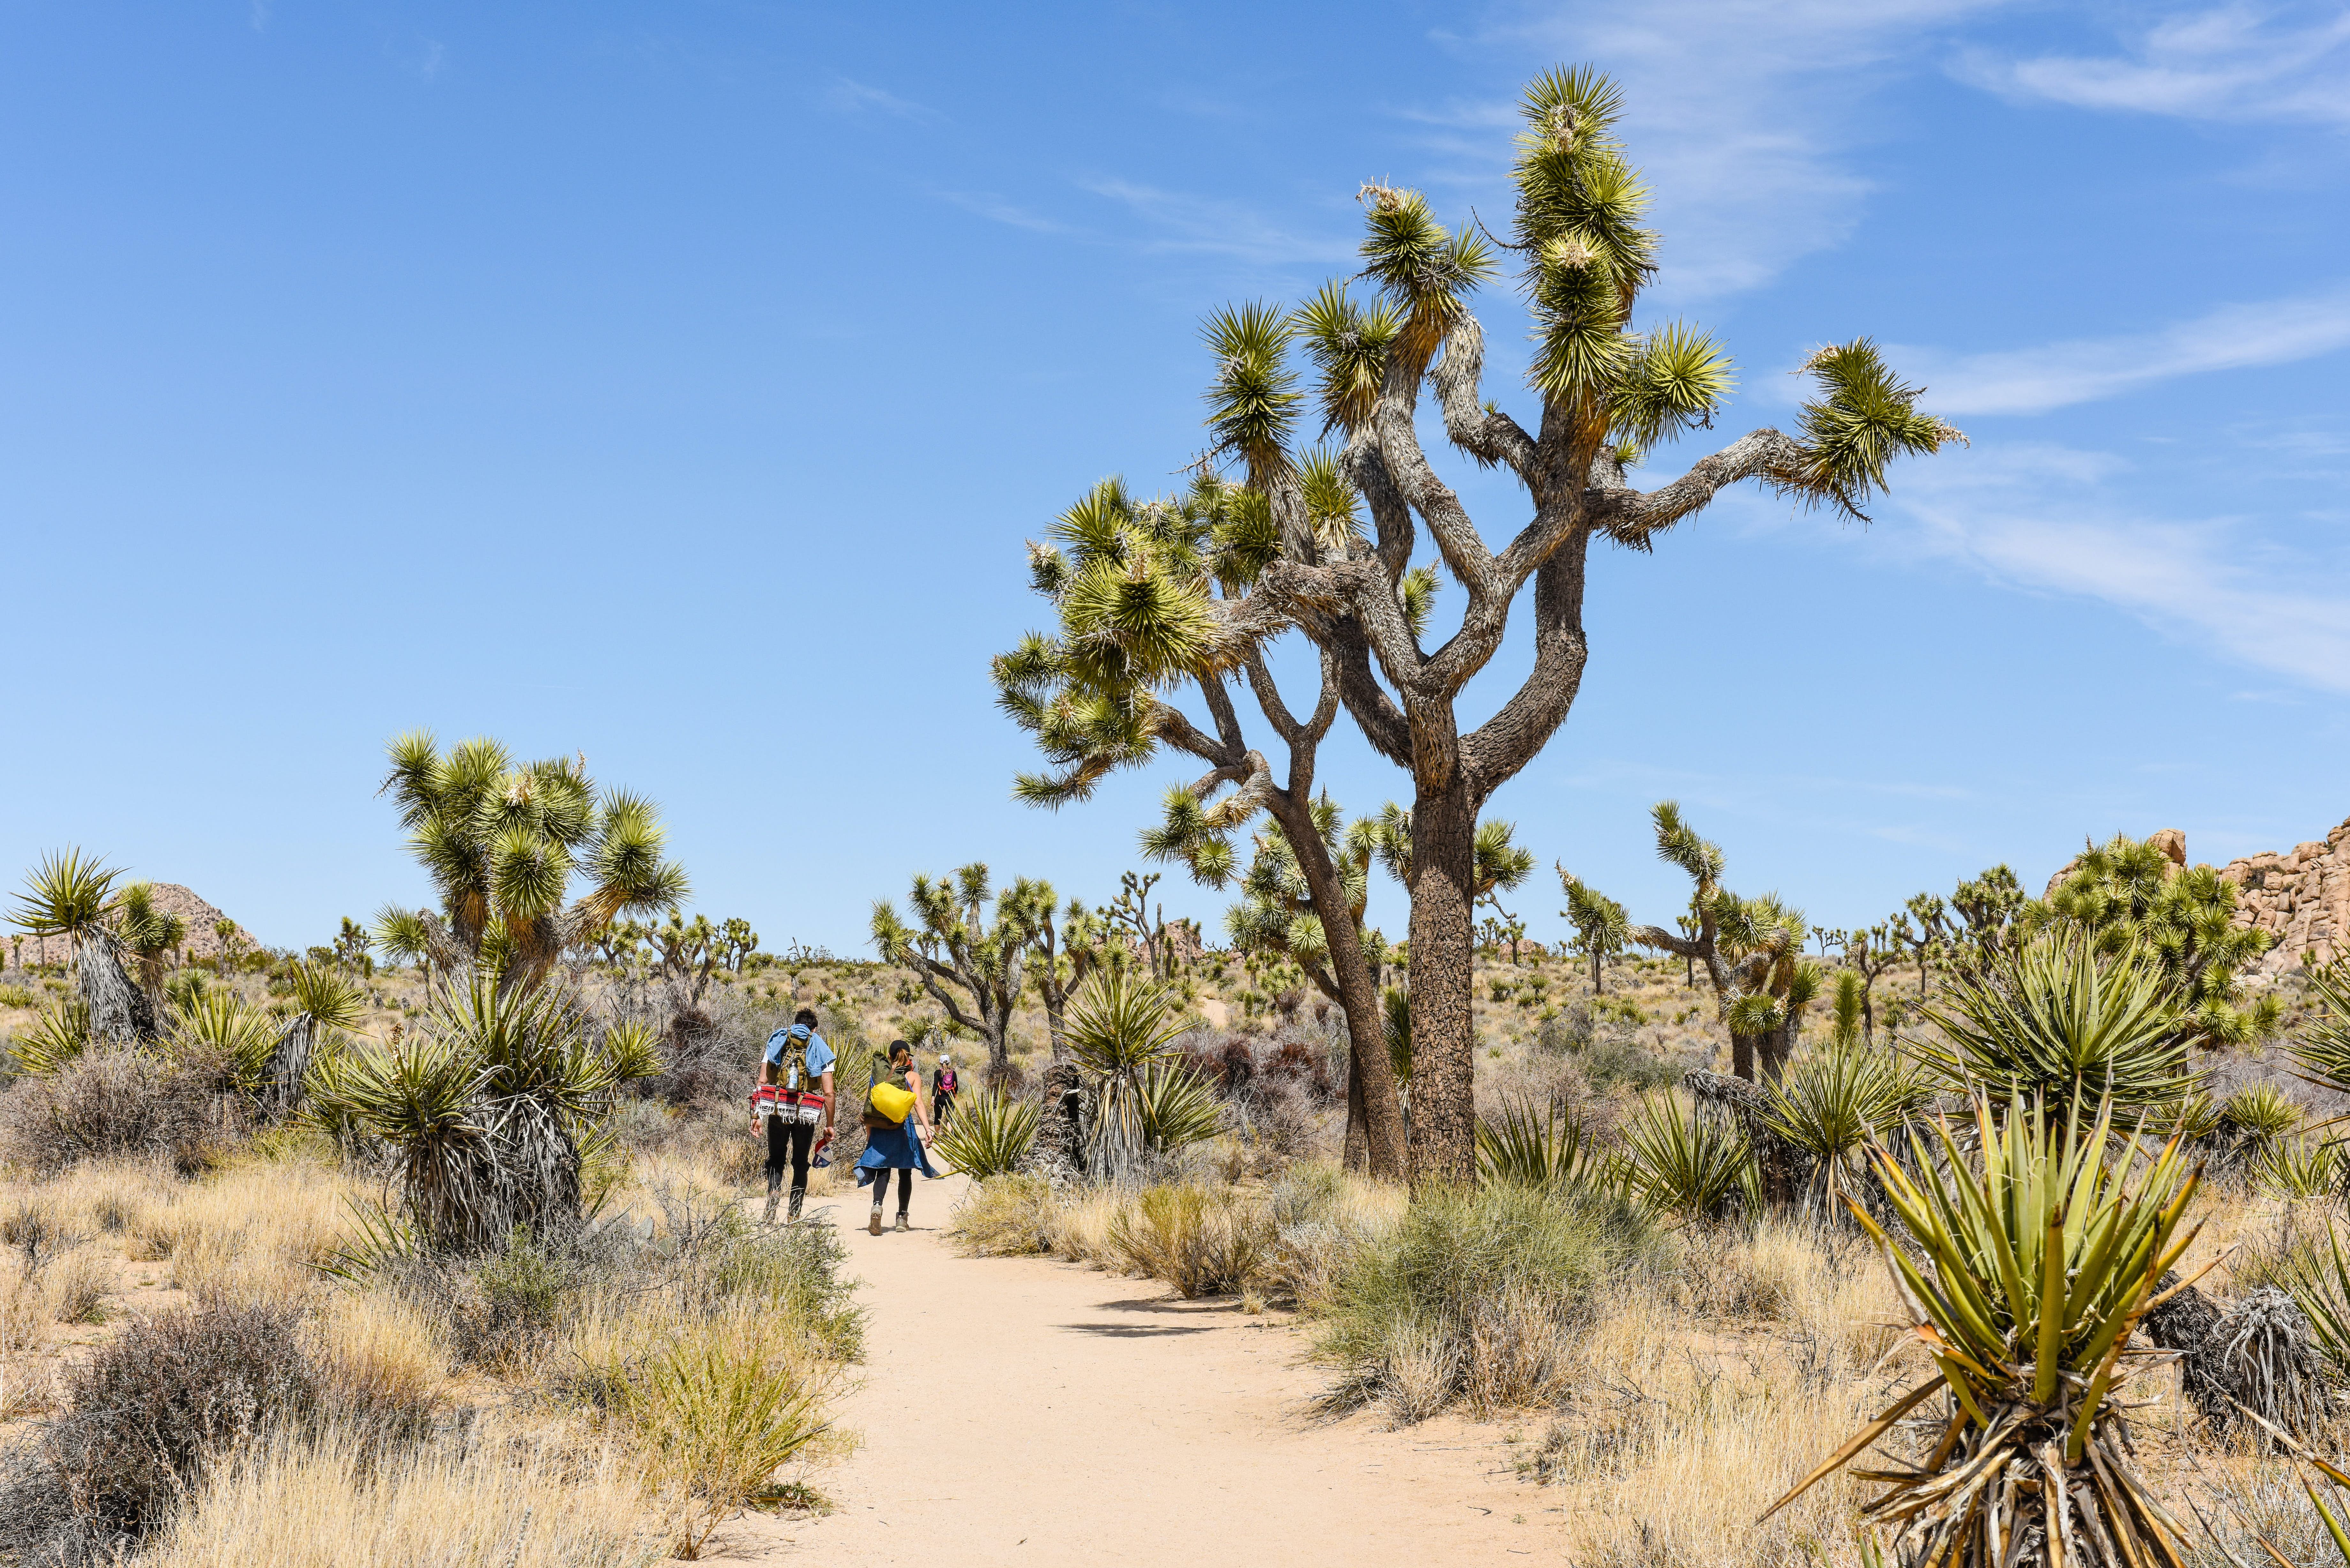 Hikers on Boy Scout Trail with Joshua trees (Yucca brevifolia) in the Joshua Tree National Park